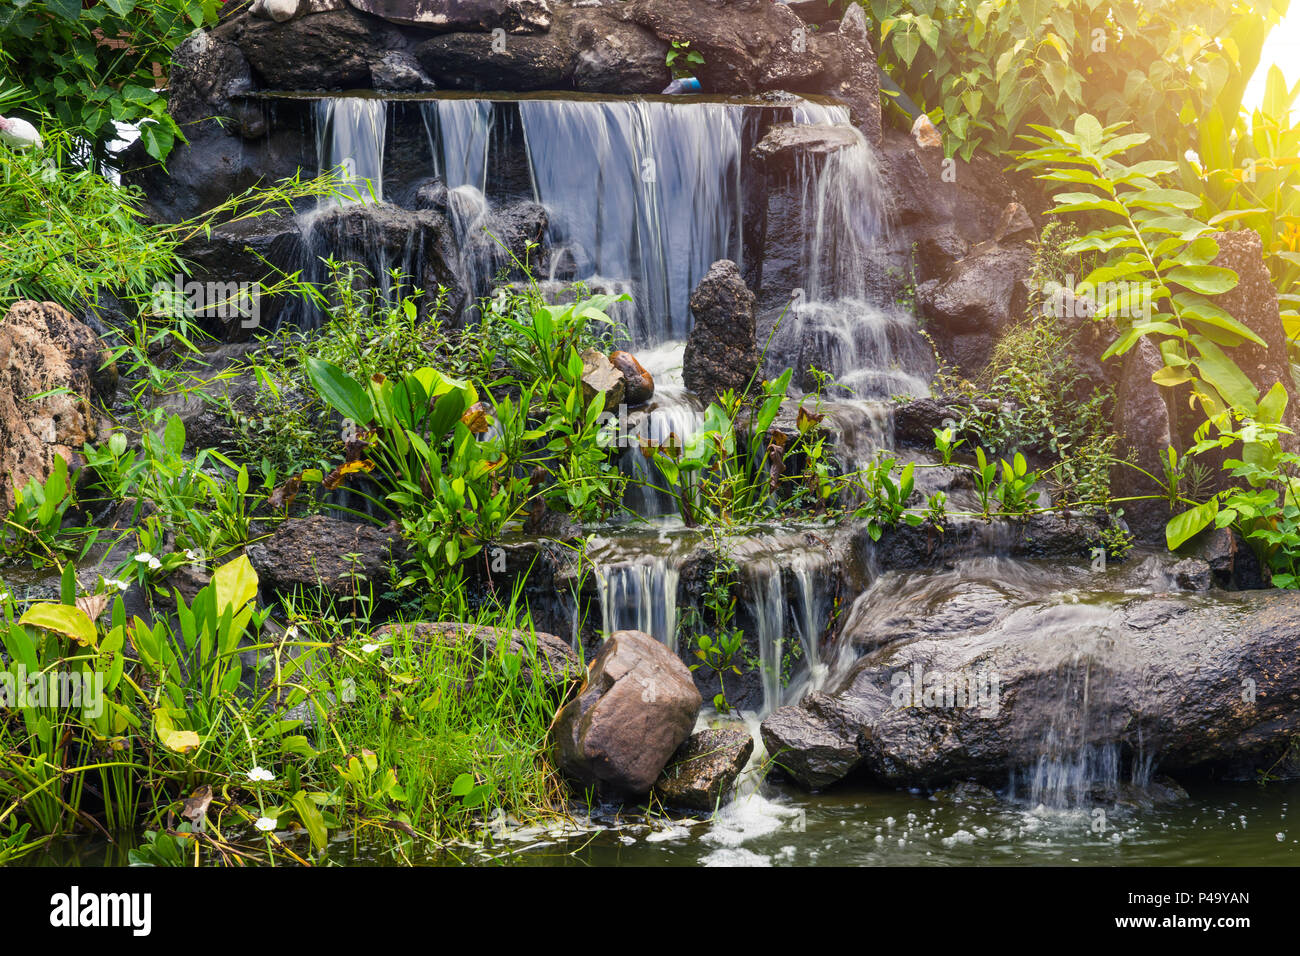 Artificial small Water fall in the park garden home green space decoration Photo Alamy